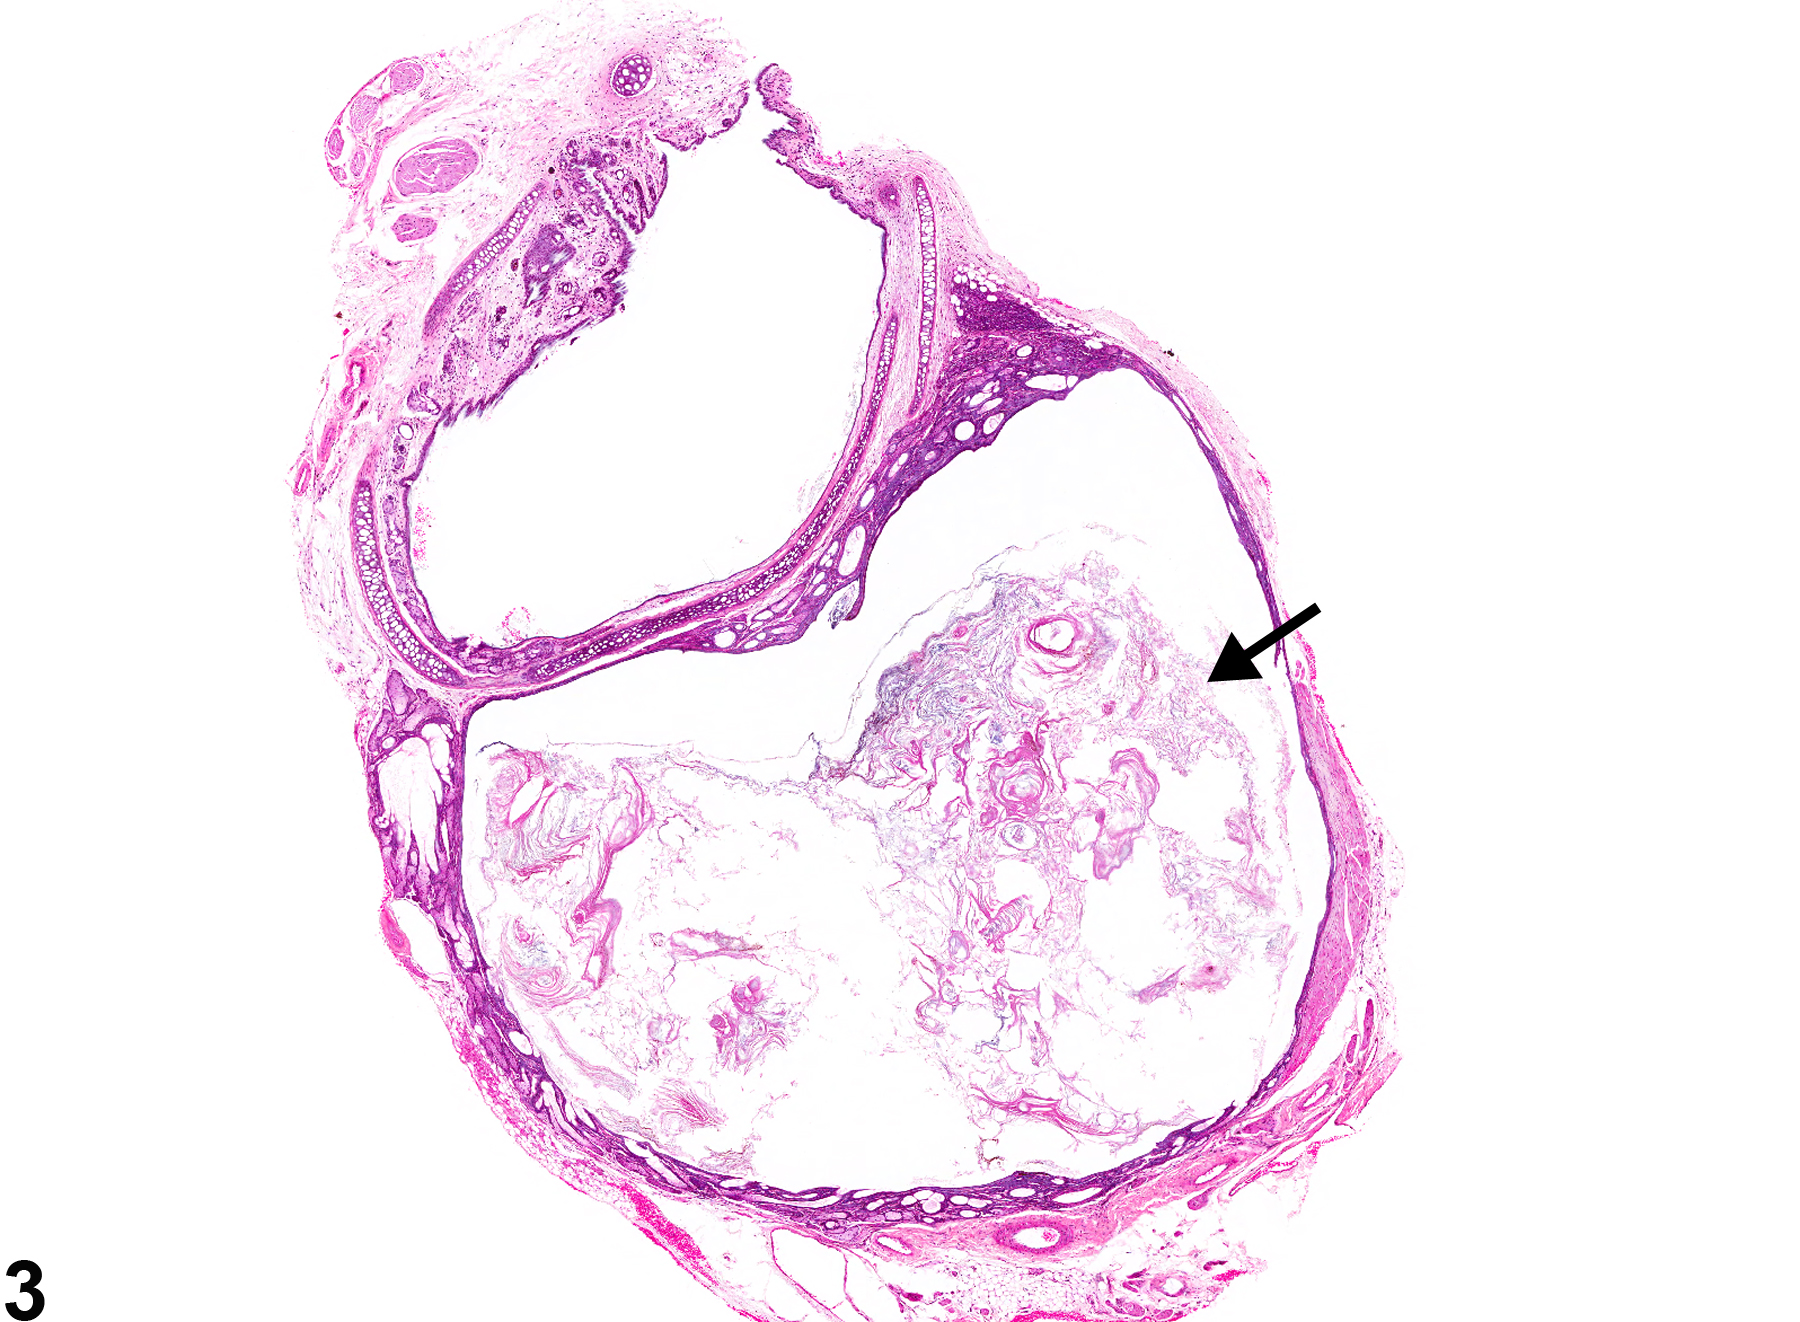 Image of duct cyst in the Zymbal's gland from a male B6C3F1 mouse in a chronic study